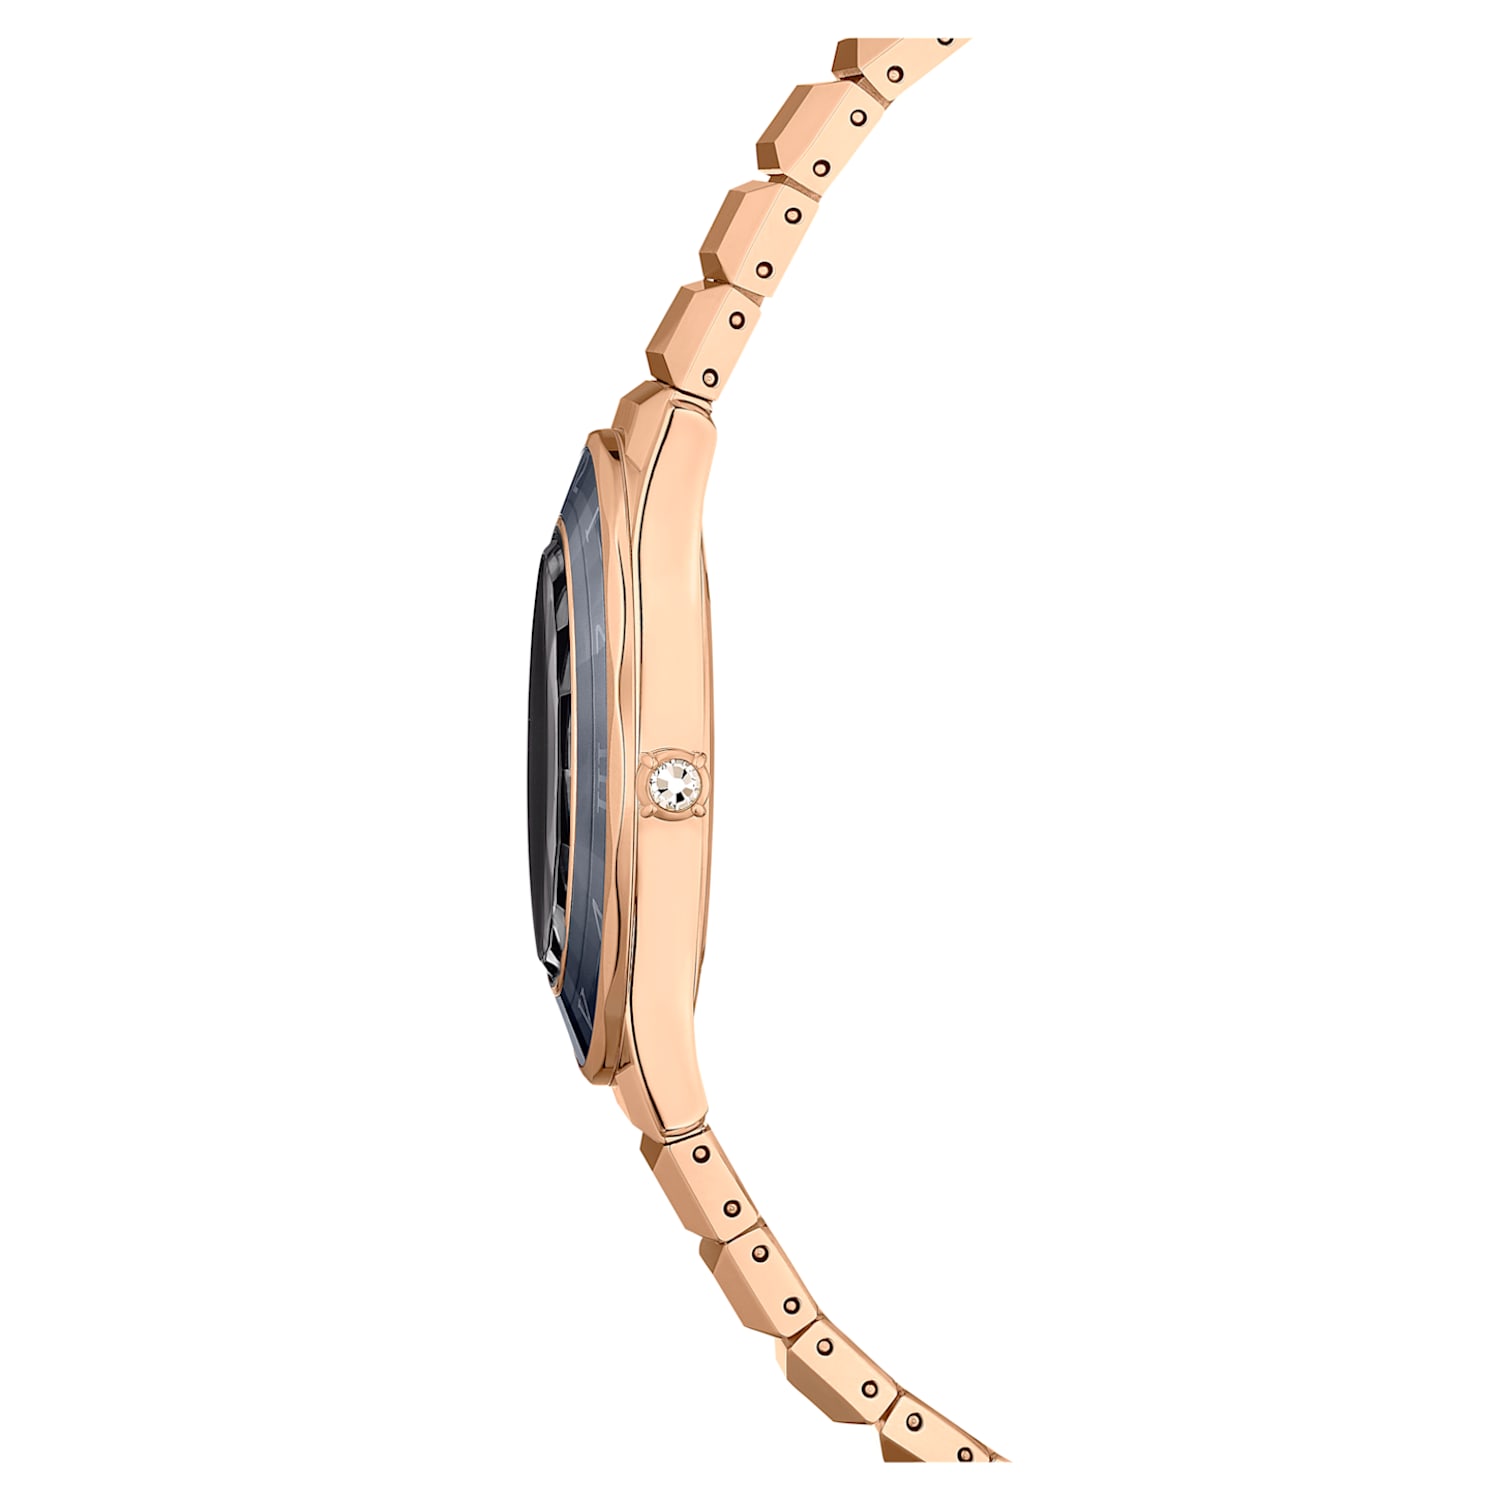 Buy quality Bracelet Style Gold Watch in Ahmedabad